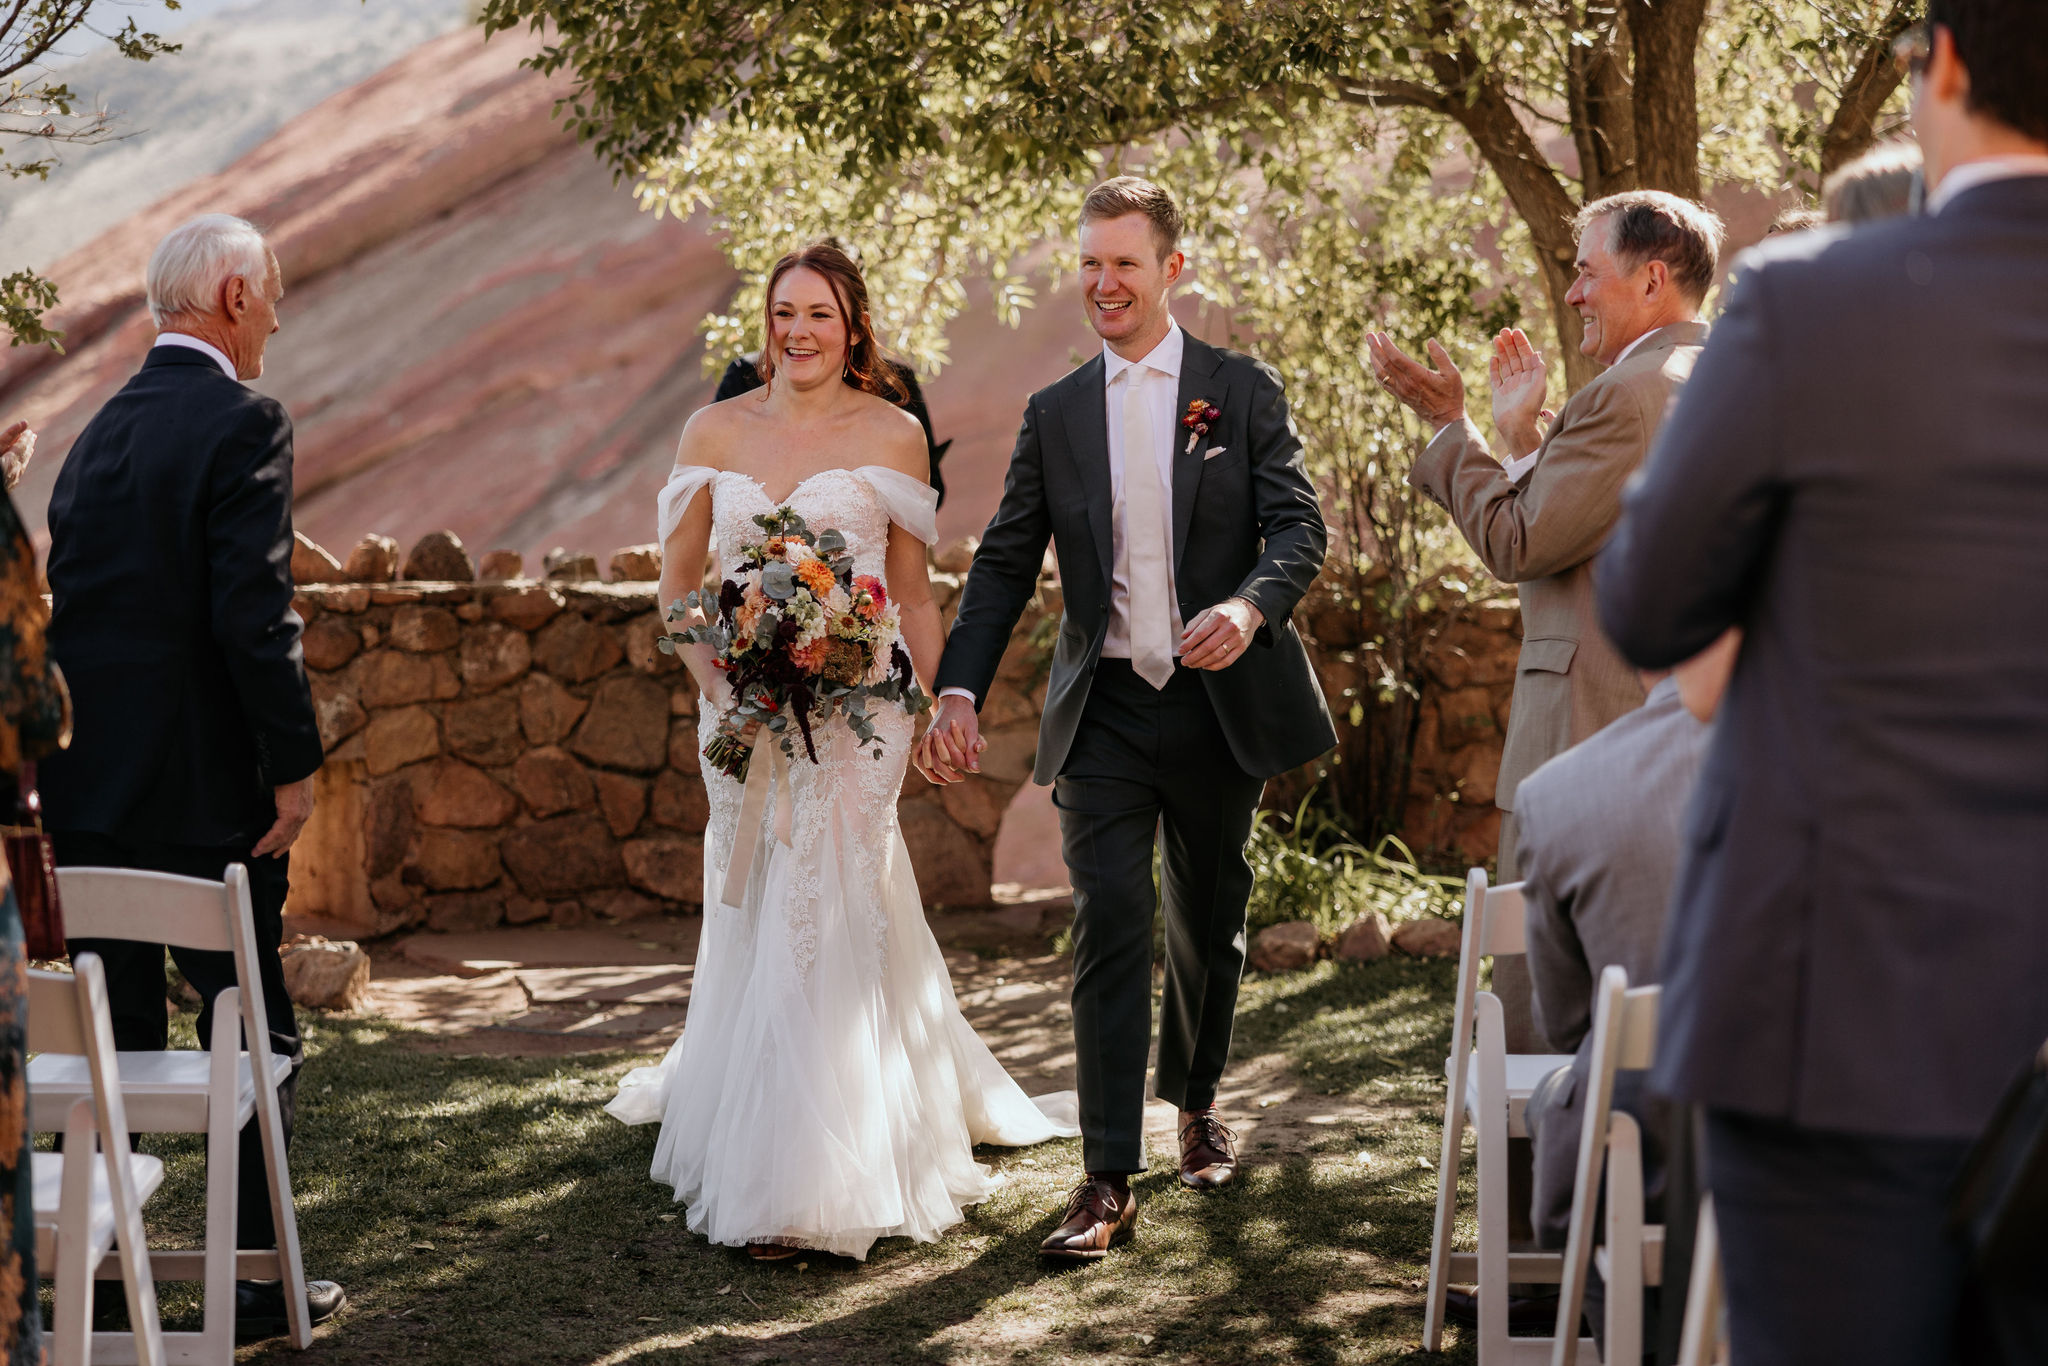 bride and groom walk down the aisle after micro wedding ceremony at red rocks.